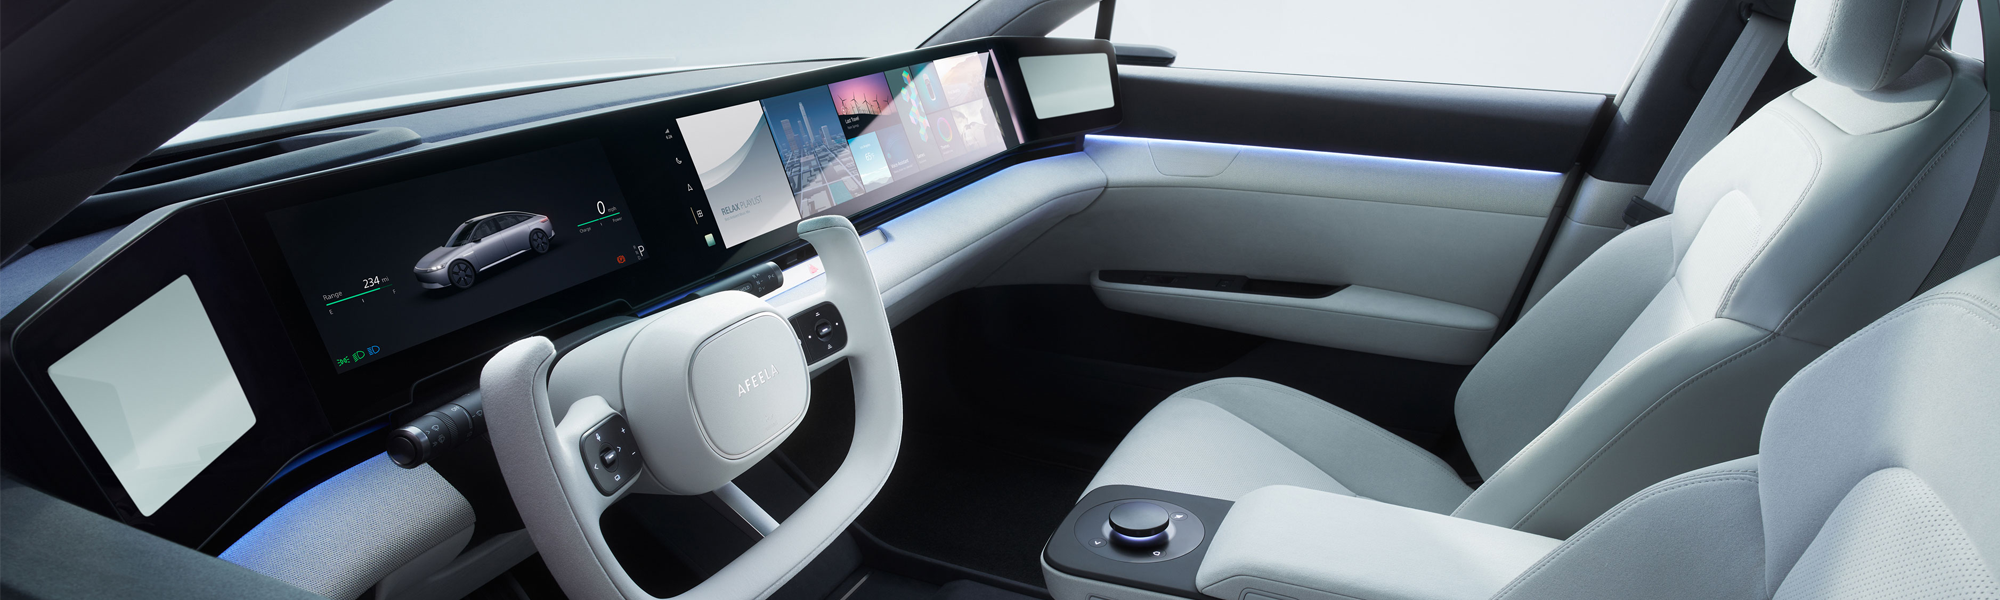 Creating the next era of in-car experience with Sony Honda Mobility